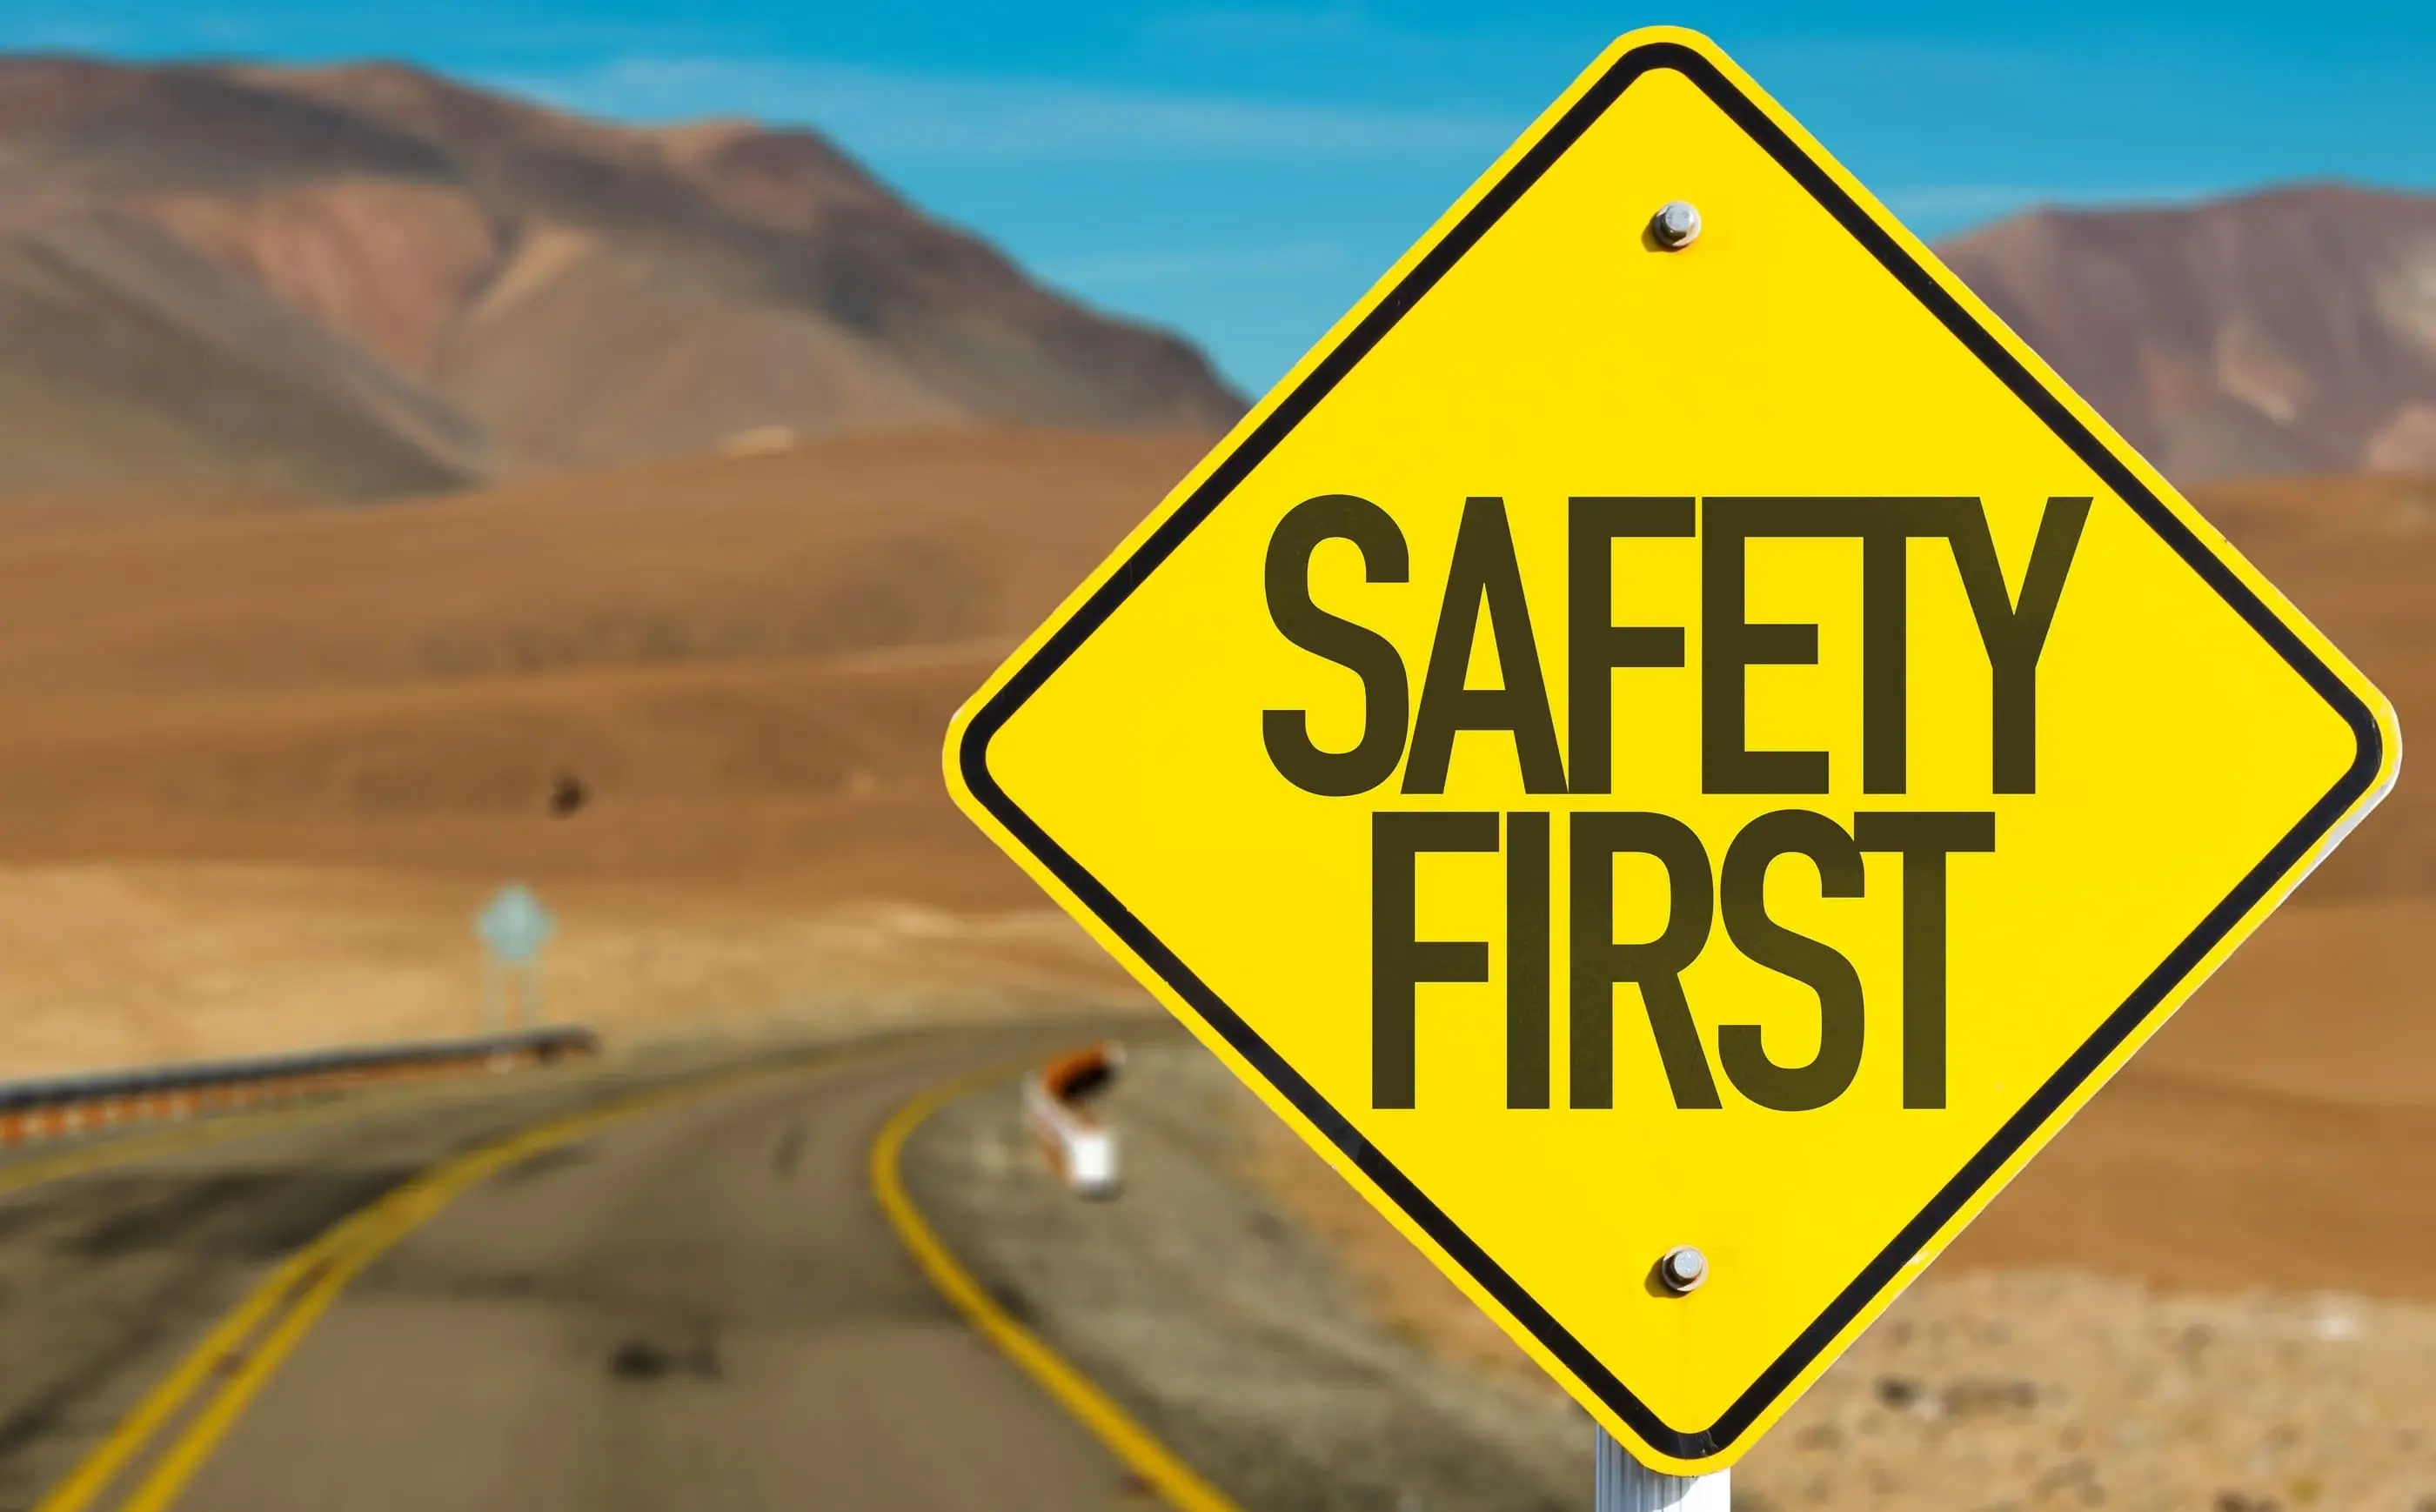 The importance of staying safe on the roads